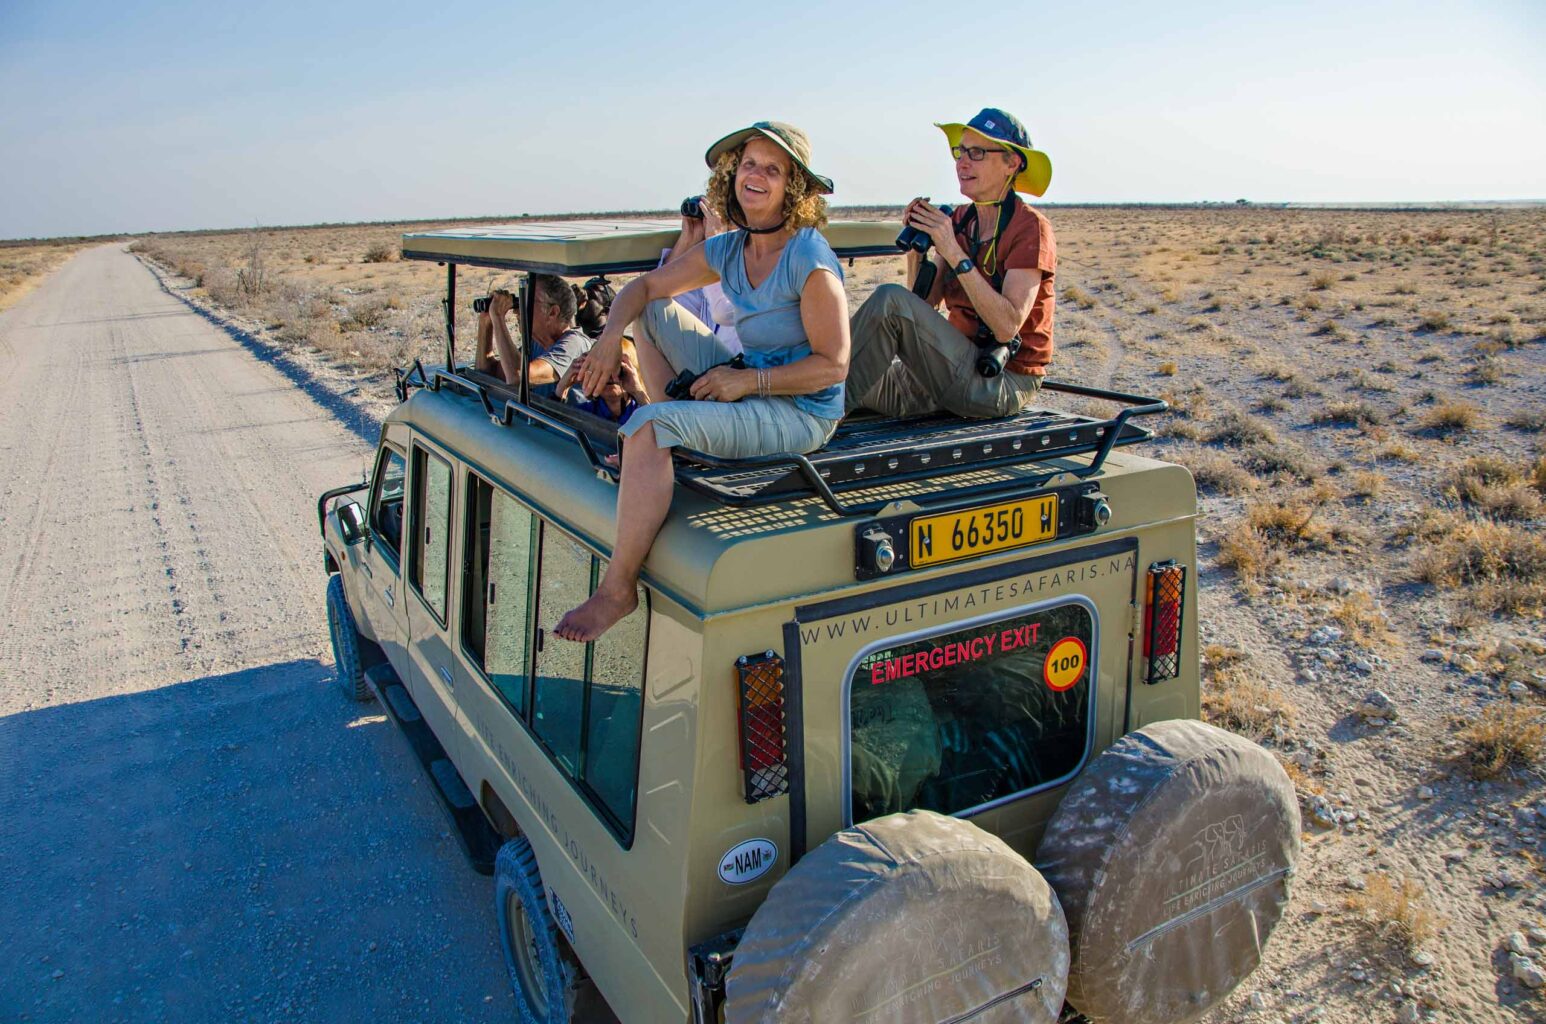 A group of travelers on a safari in Namibia.